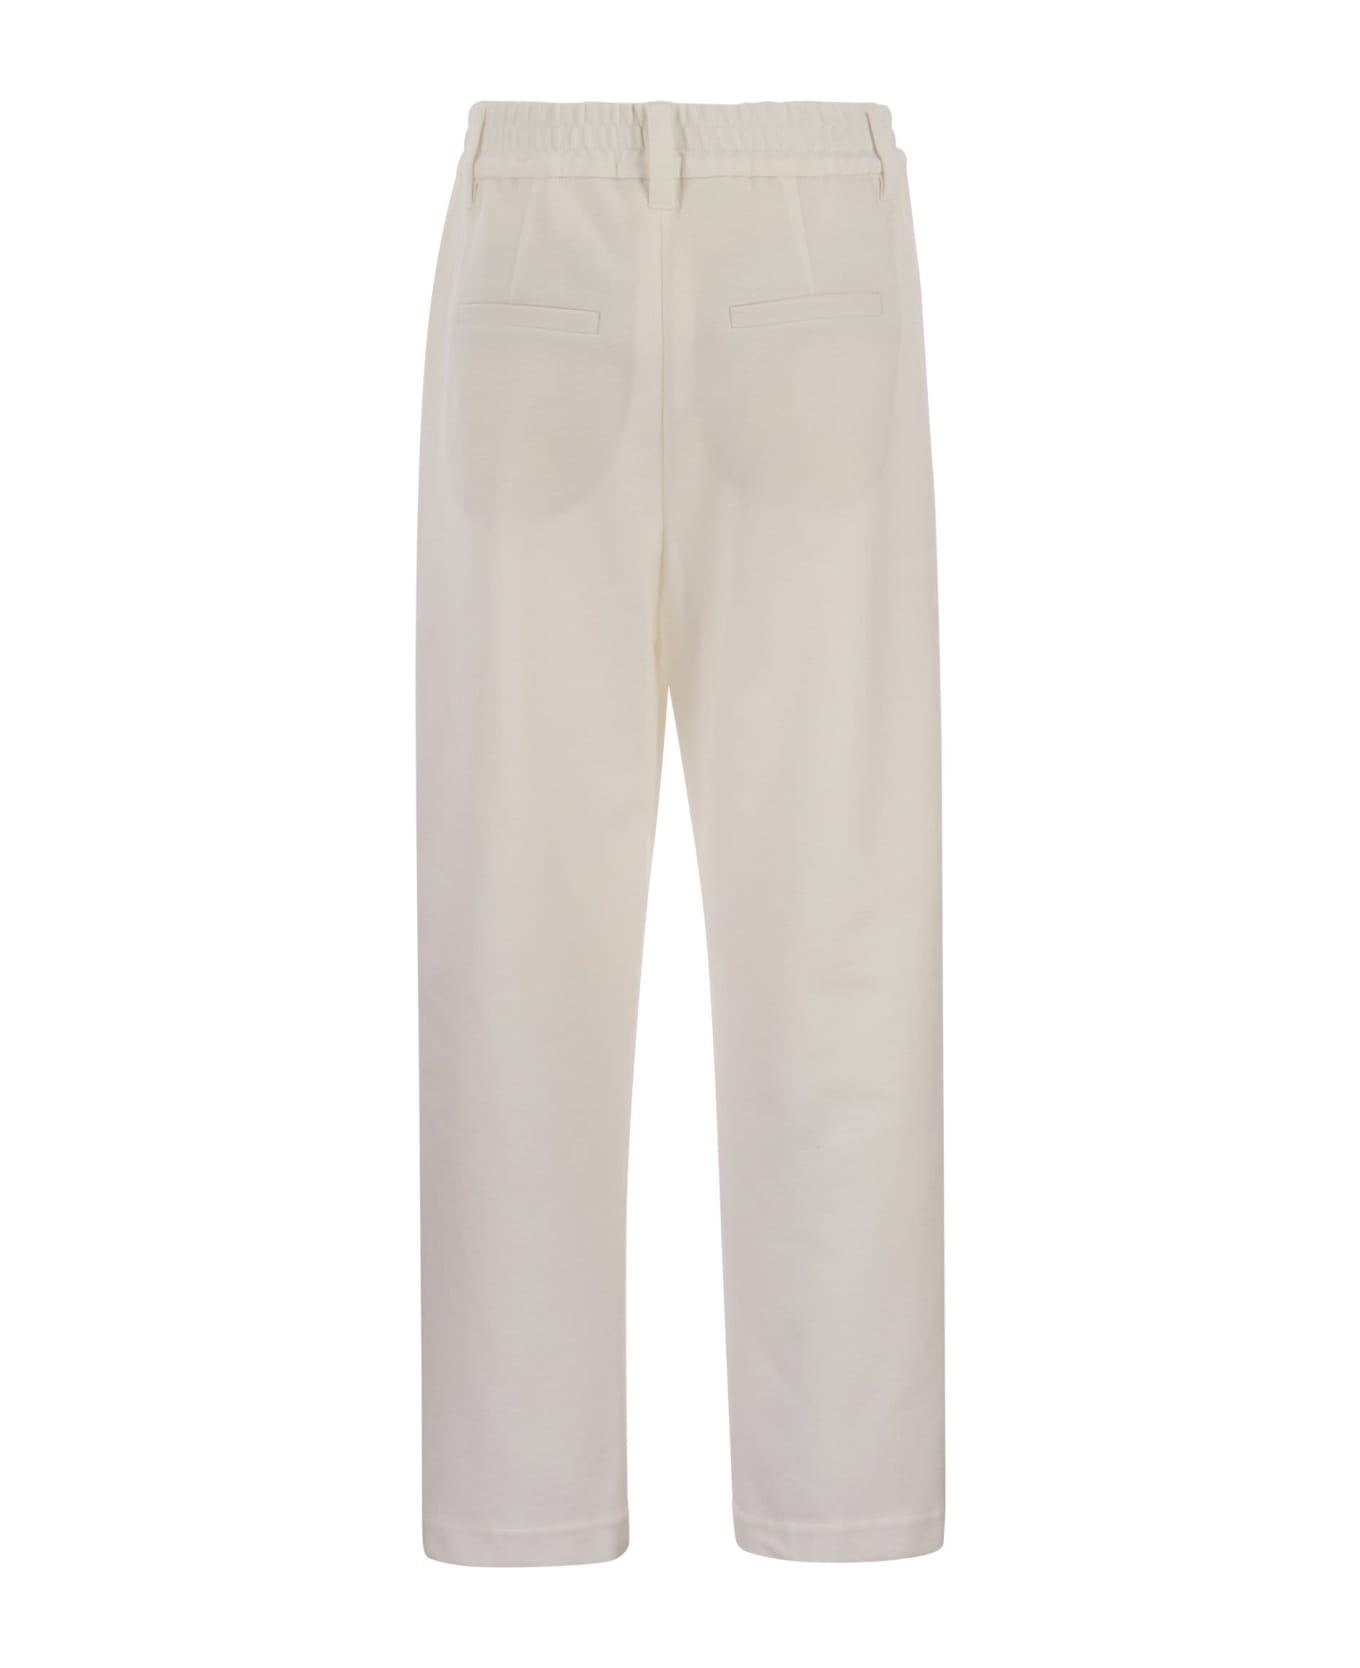 Brunello Cucinelli Baggy Trousers - White ボトムス